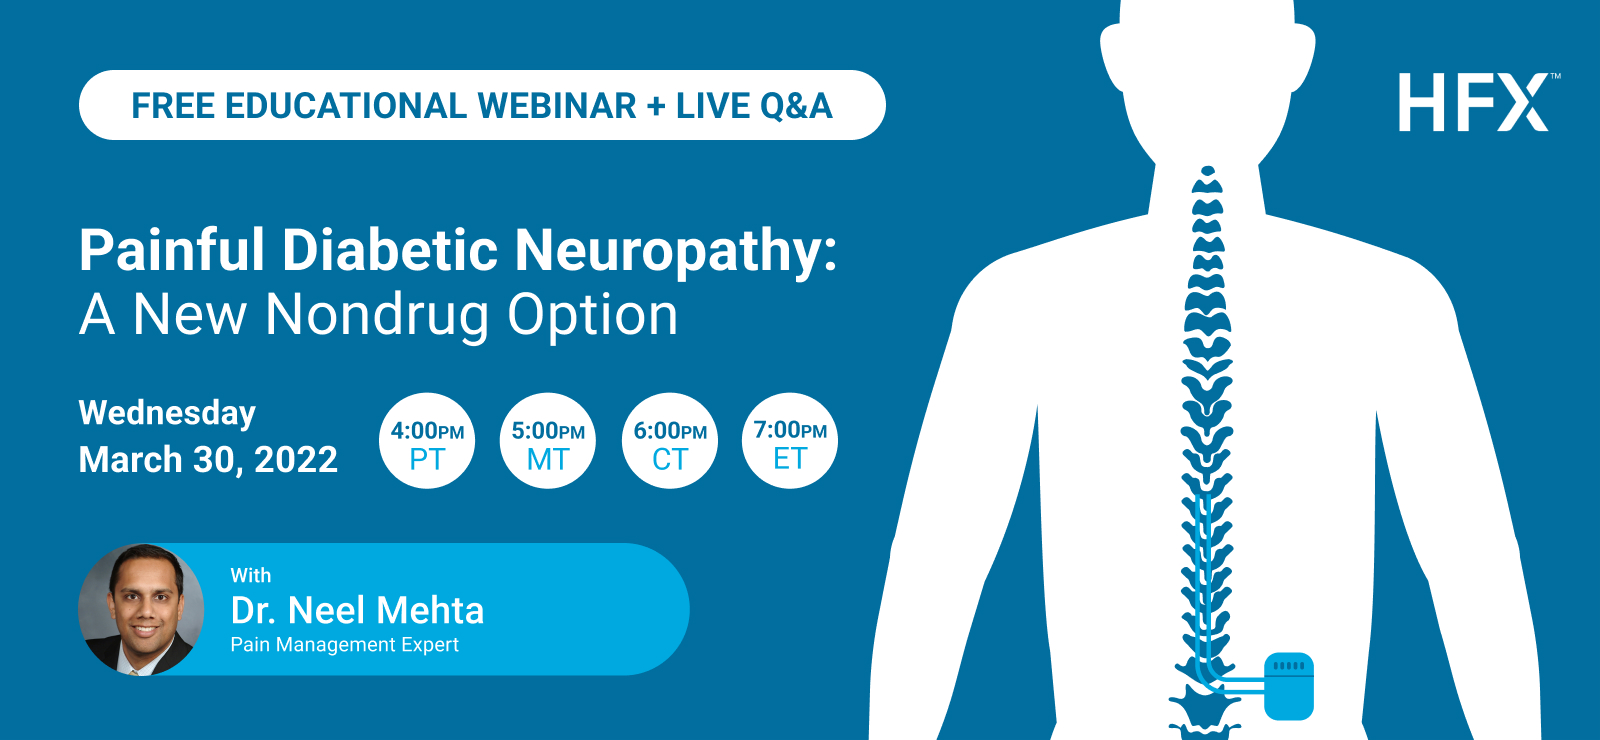 Learn About A New Nondrug Treatment for Painful Diabetic Neuropathy